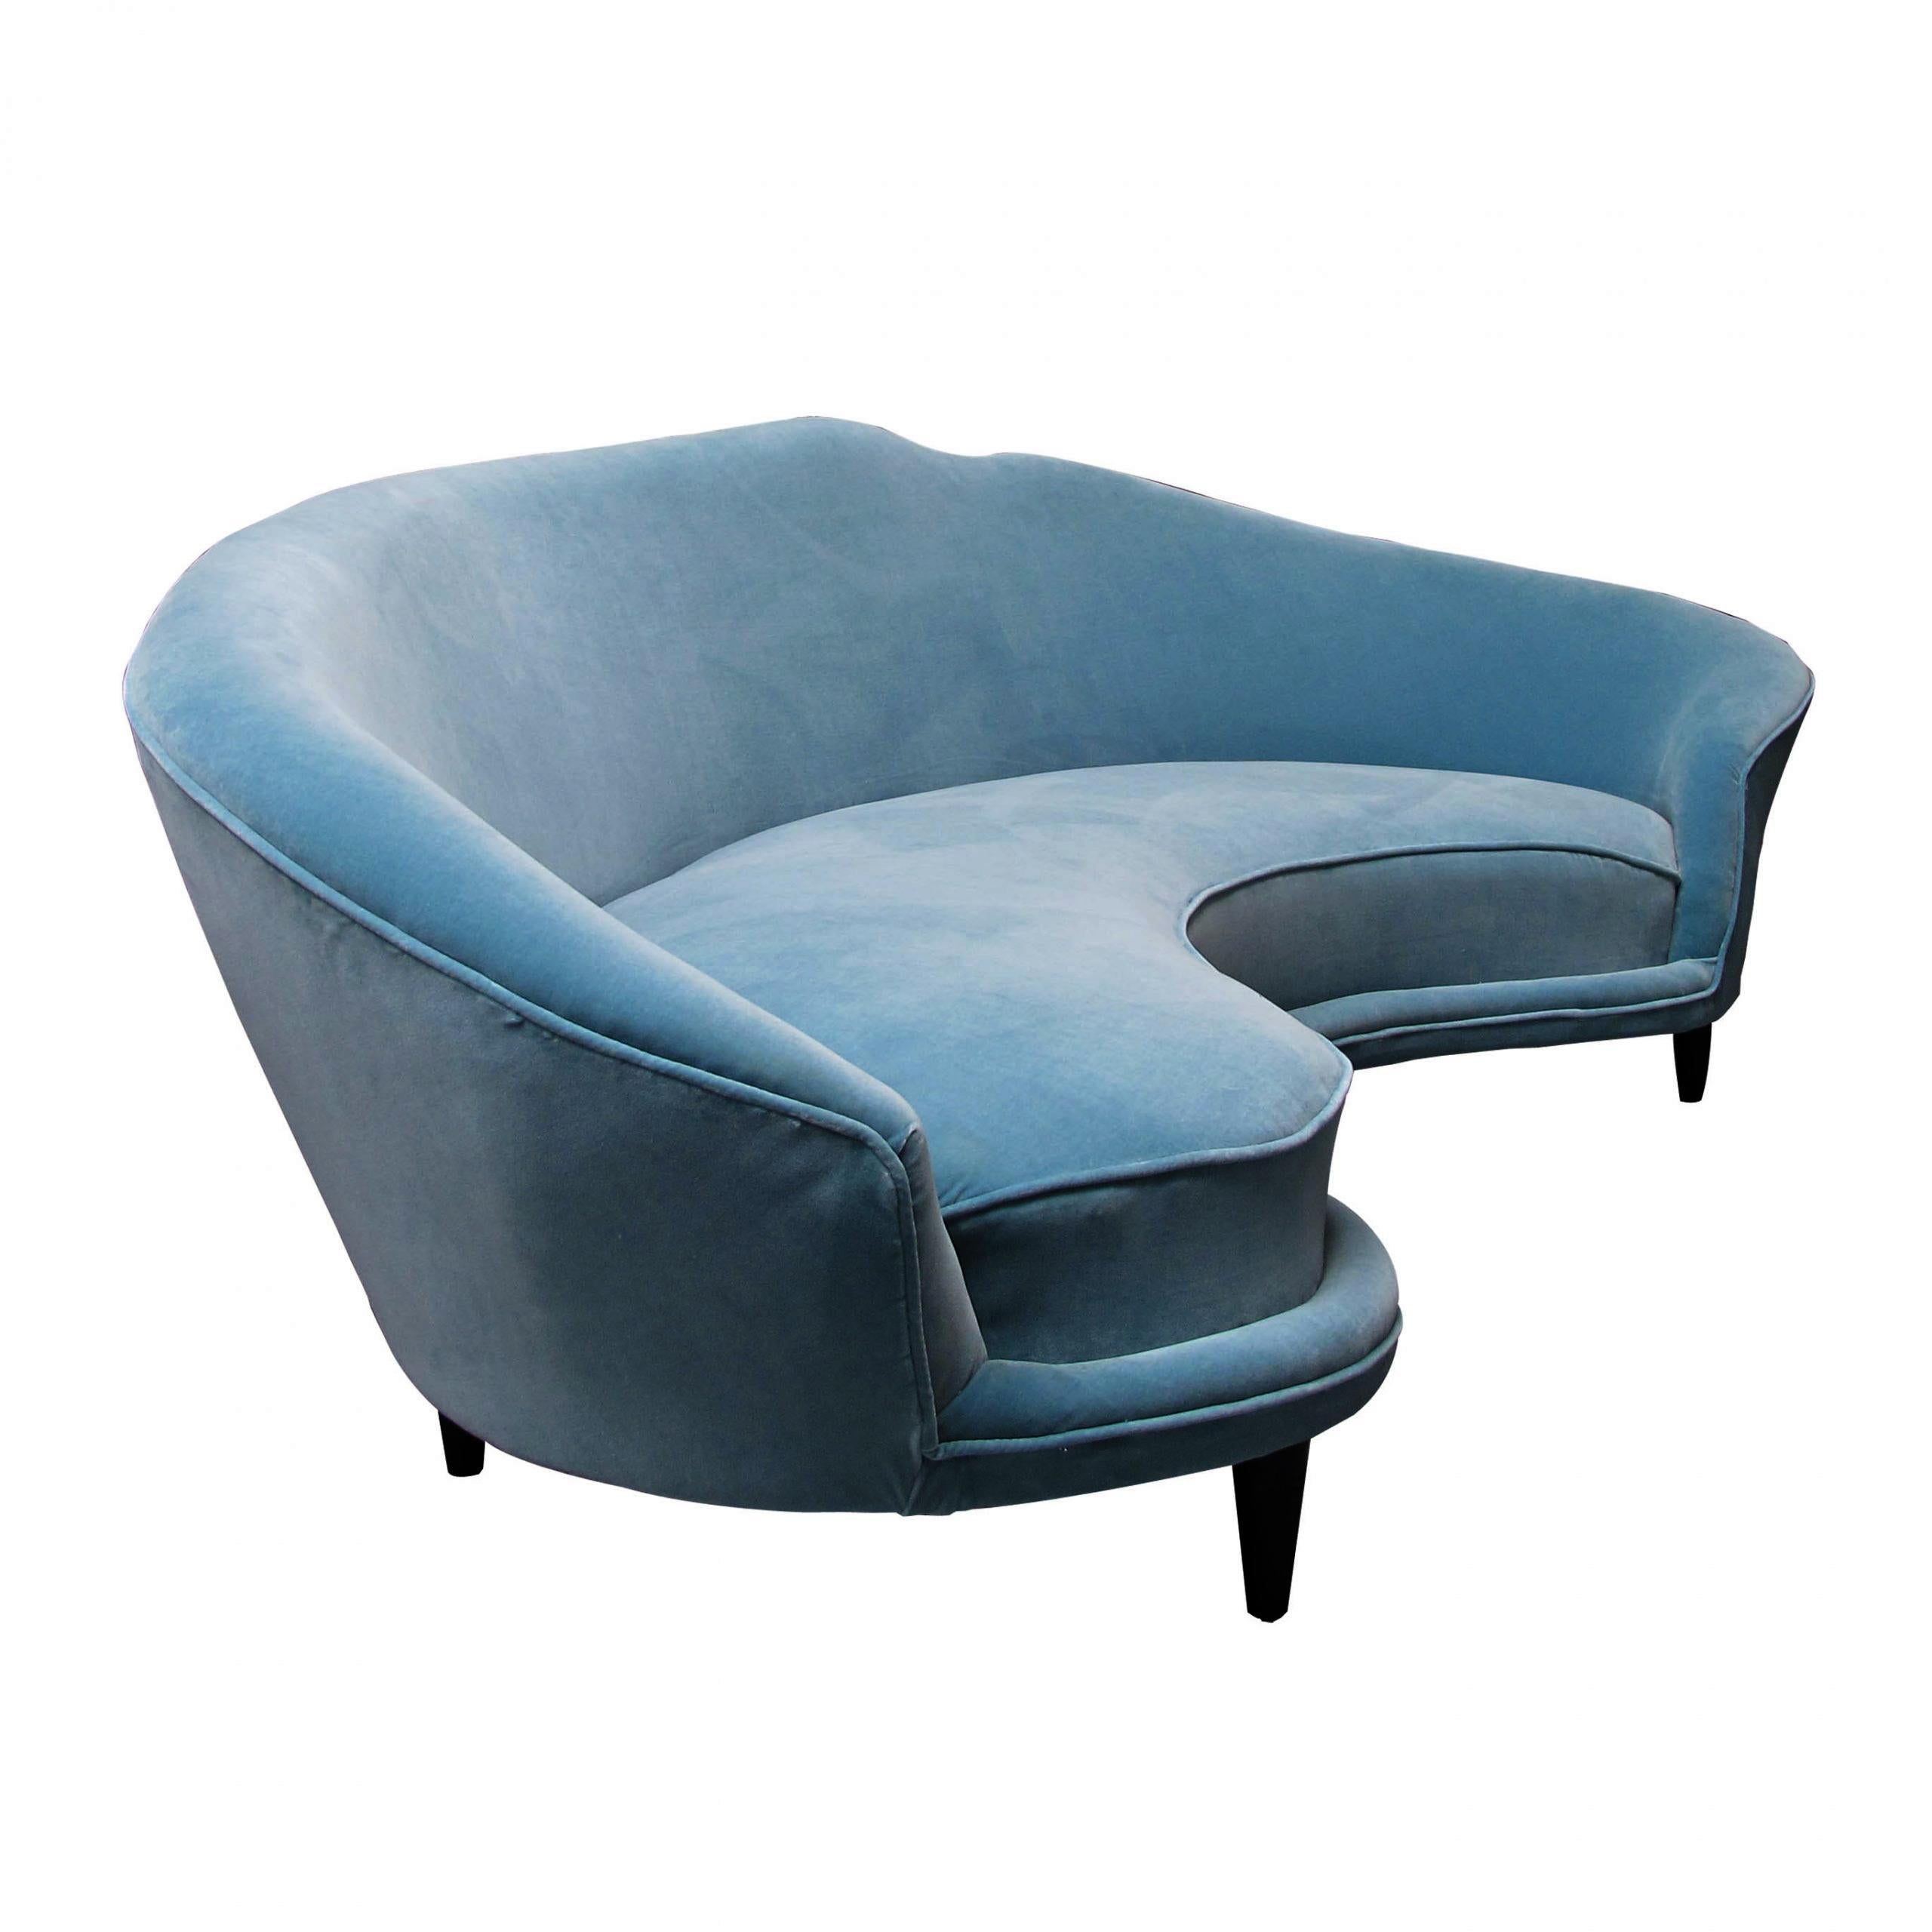 Large Mid-century modern sofa designed in the manner of Frederico Munari with generous curves. The sofa has a deep seating and a slopping backrest and arms, that makes it very comfortable without compromising on this iconic design. The sofa has been